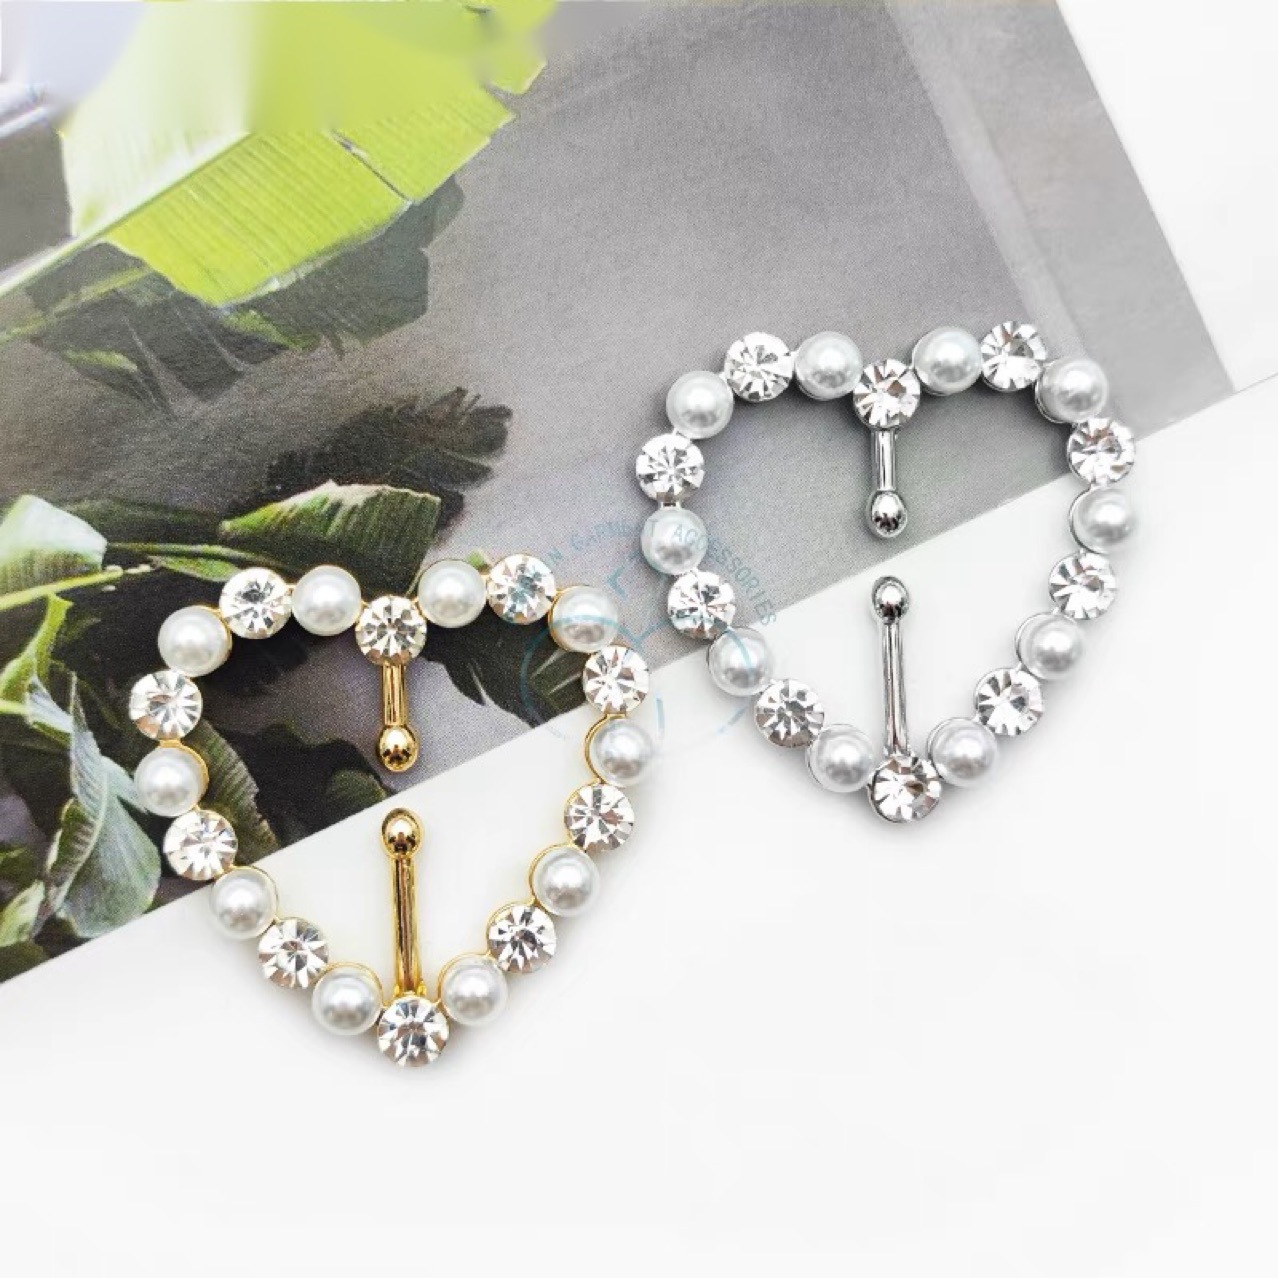 Heart-Shaped Metal Buckle Adjustable Buckle Heart-Shaped Trench Coat Belt Retaining Ring All-Match Pearl Decoration Clothes and Bags Accessories